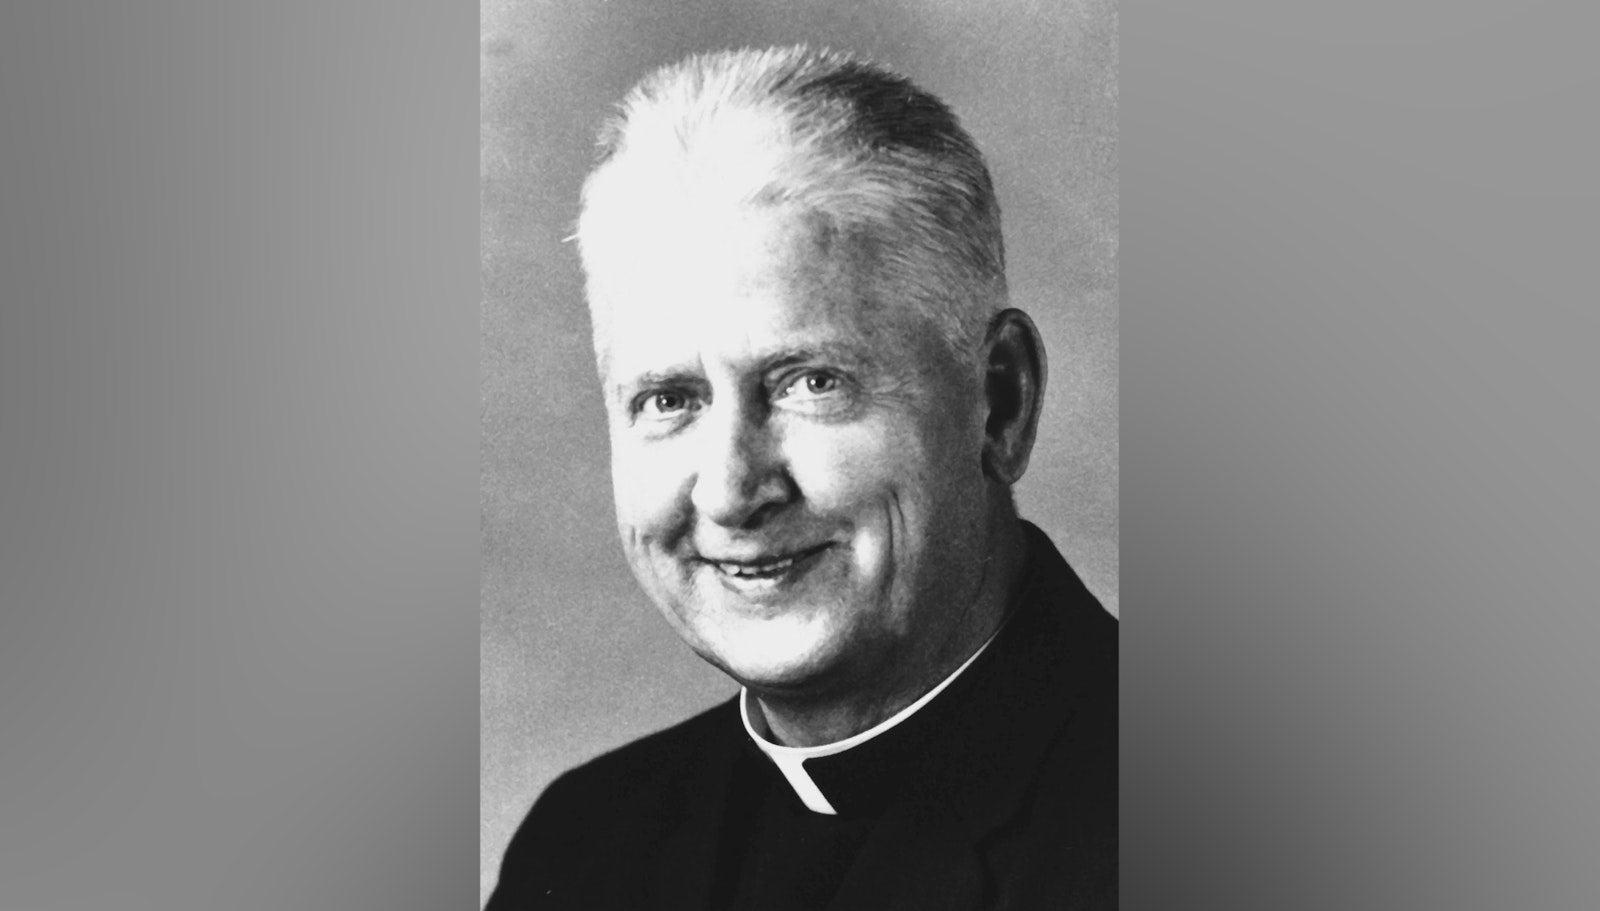 Jesuit Fr. Walter J. Ciszek, a Pennsylvania-born missionary to the Soviet Union, is pictured in an undated file photo. Fr. Ciszek survived 23 years in Russia, 15 of those years at hard labor in the Gulag, the horrific Siberian labor camps. (CNS photo/A.D. Times)